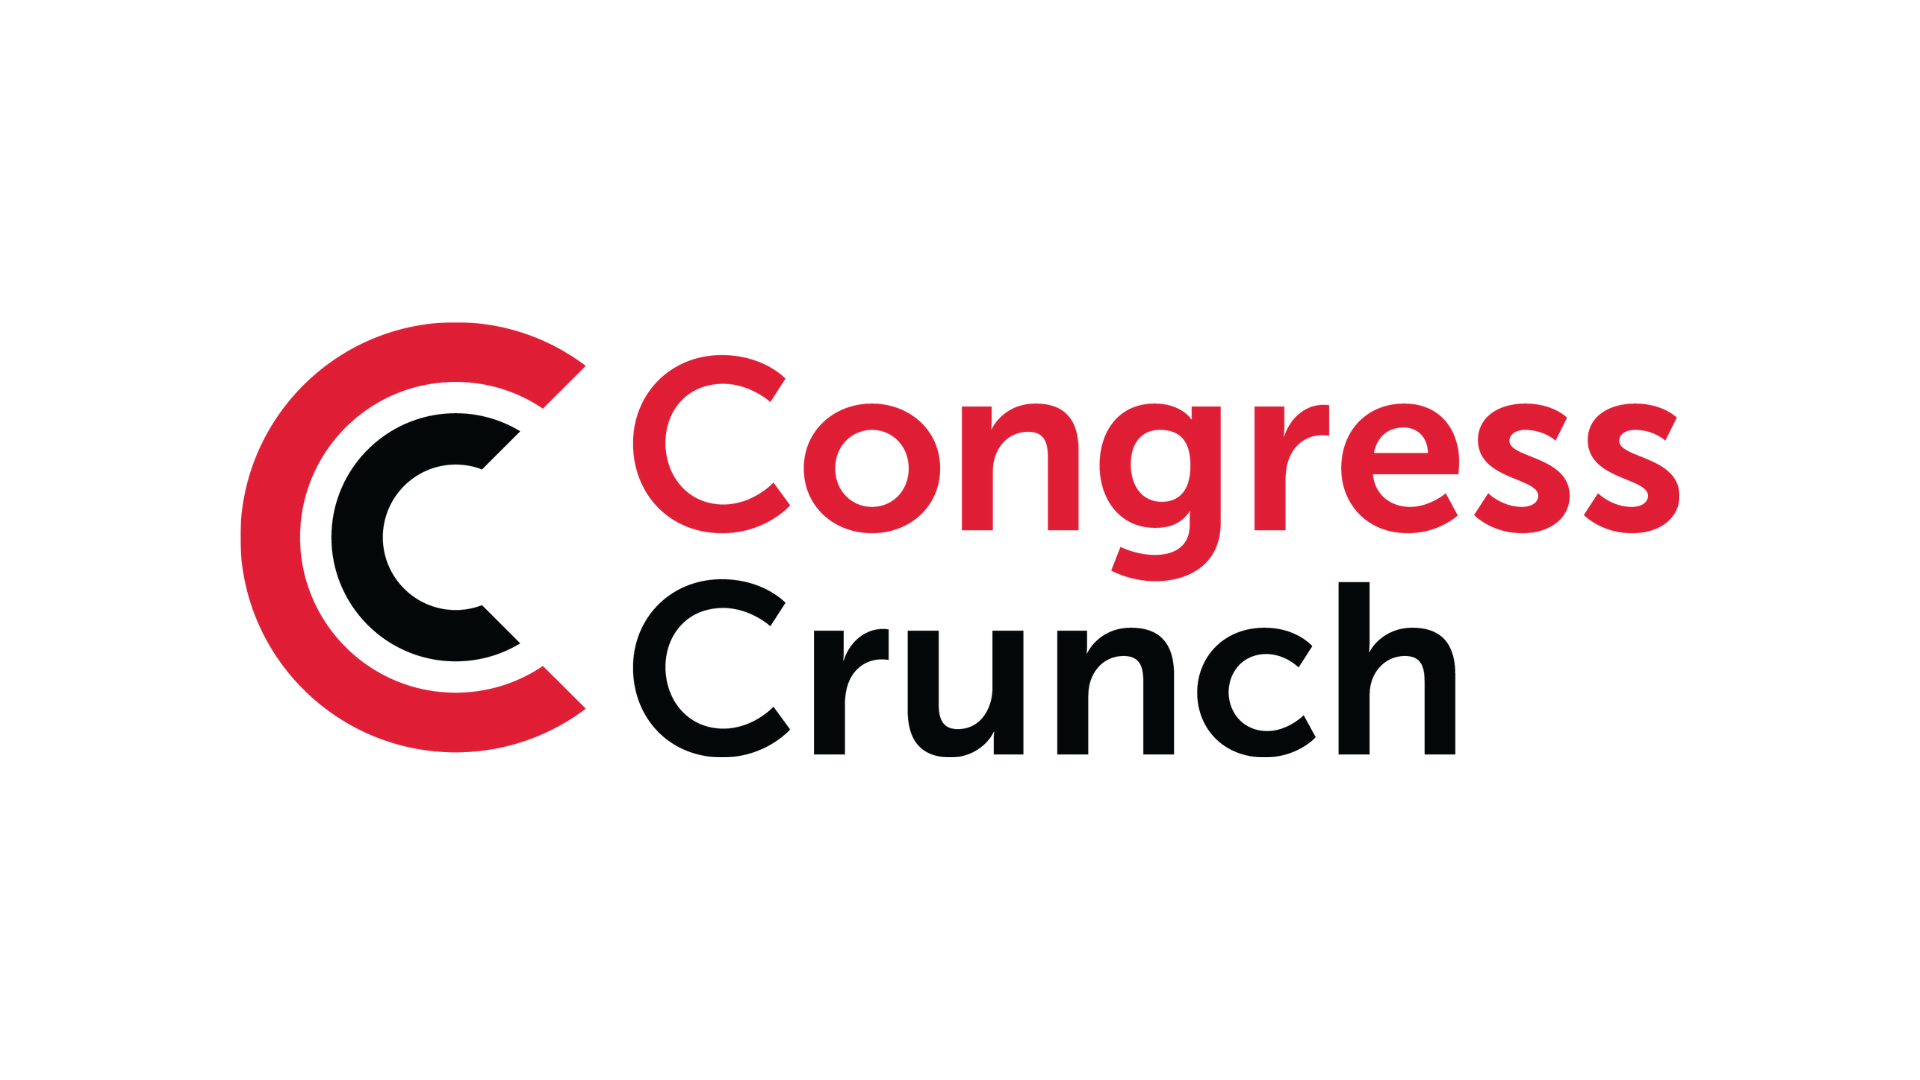 CCgroup’s Congress Crunch: How to pitch for an MWC speaking opportunity